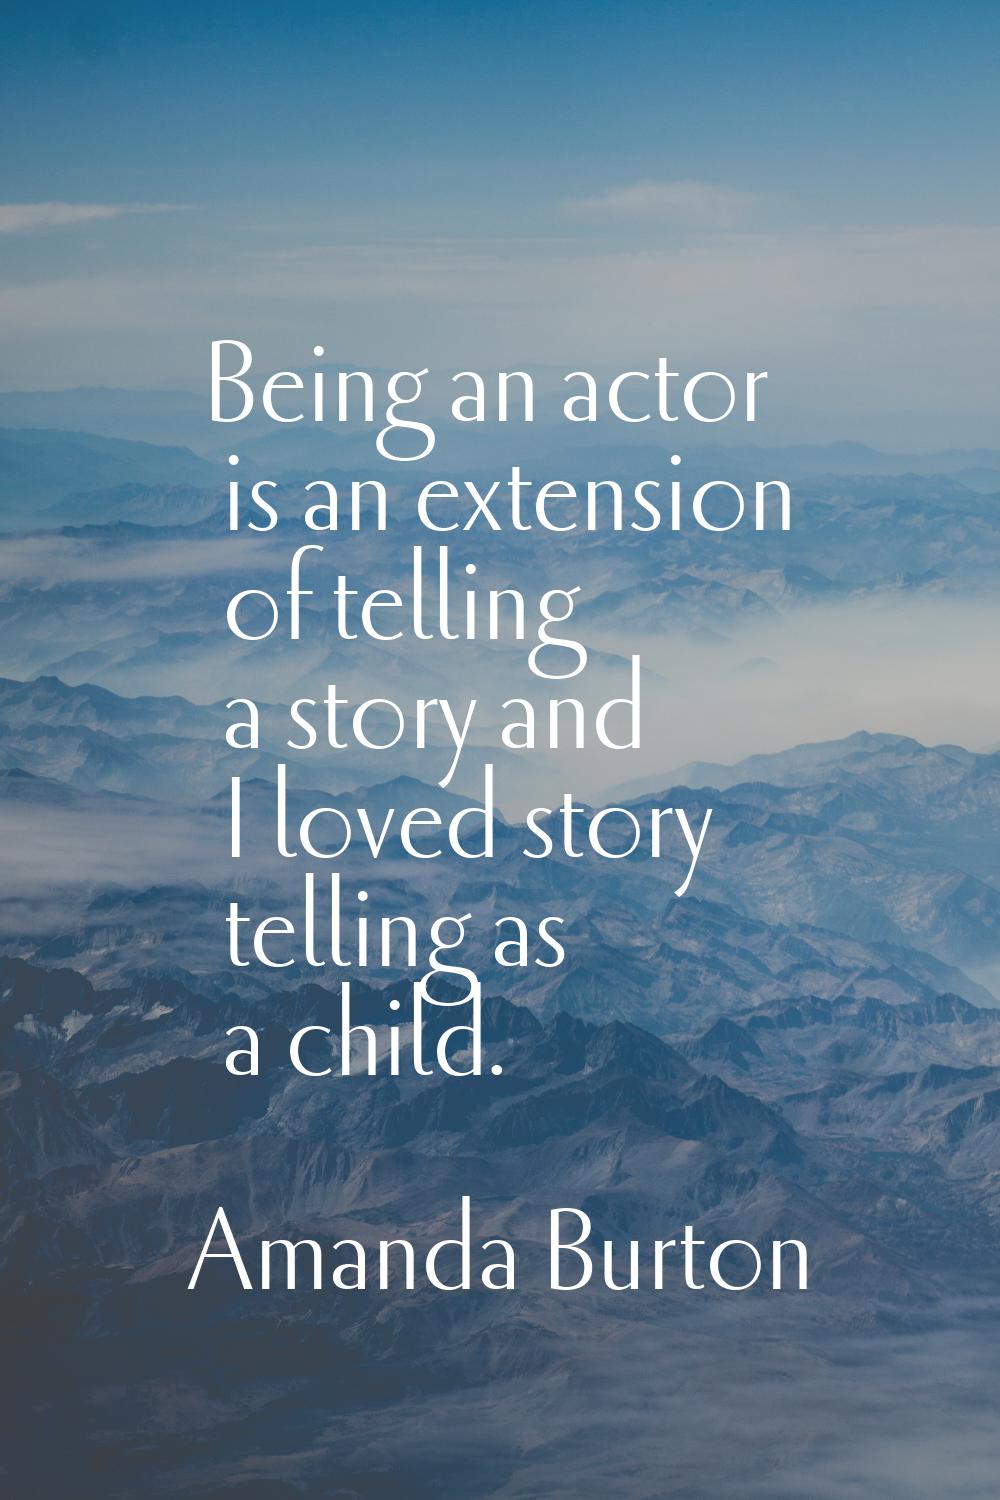 Being an actor is an extension of telling a story and I loved story telling as a child.